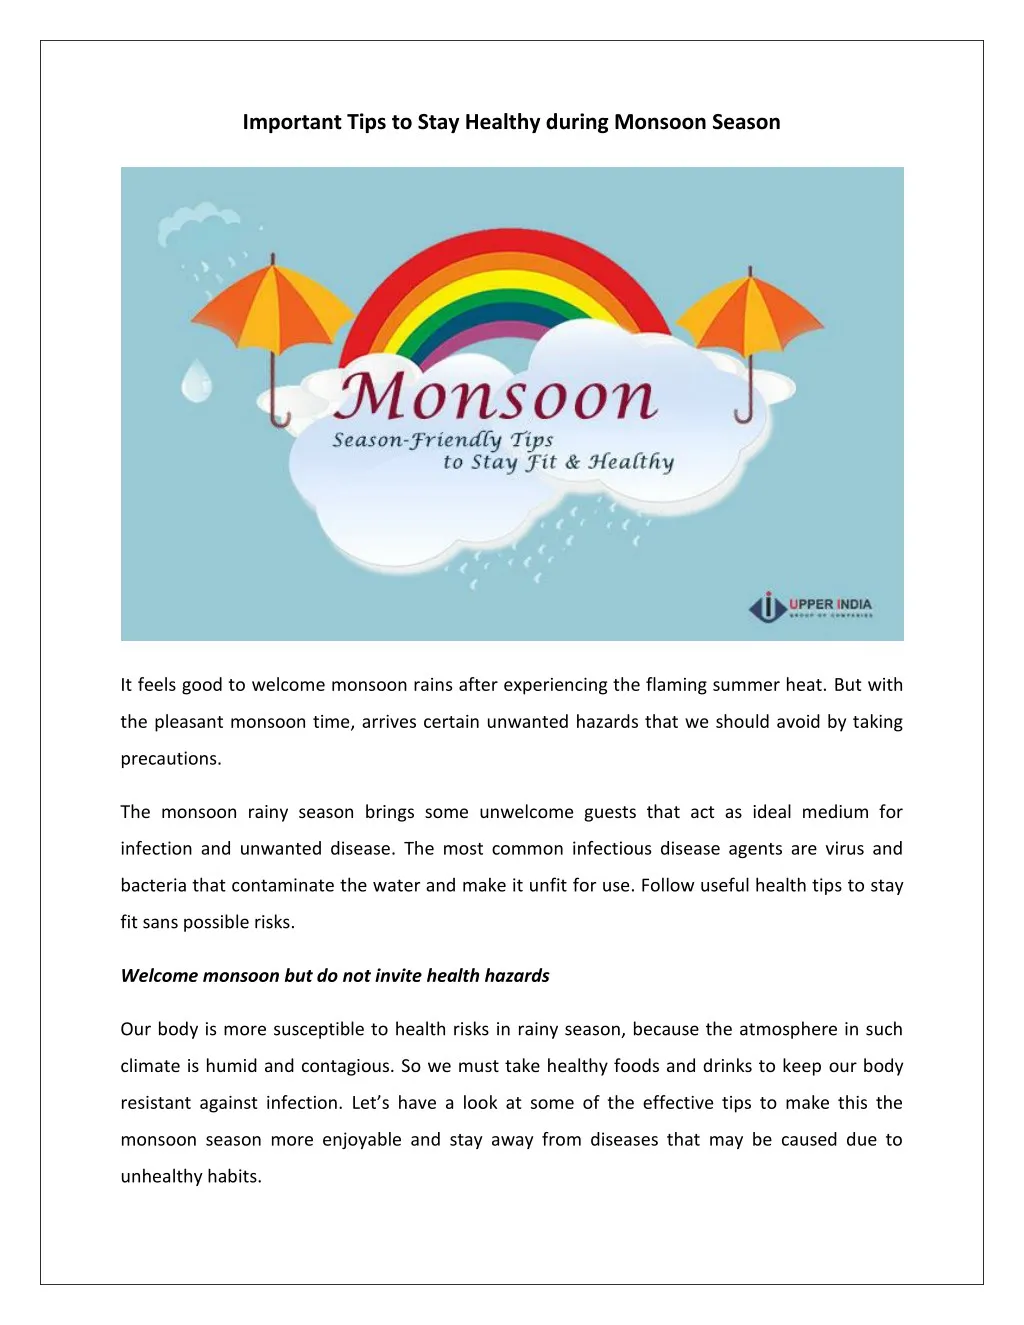 important tips to stay healthy during monsoon